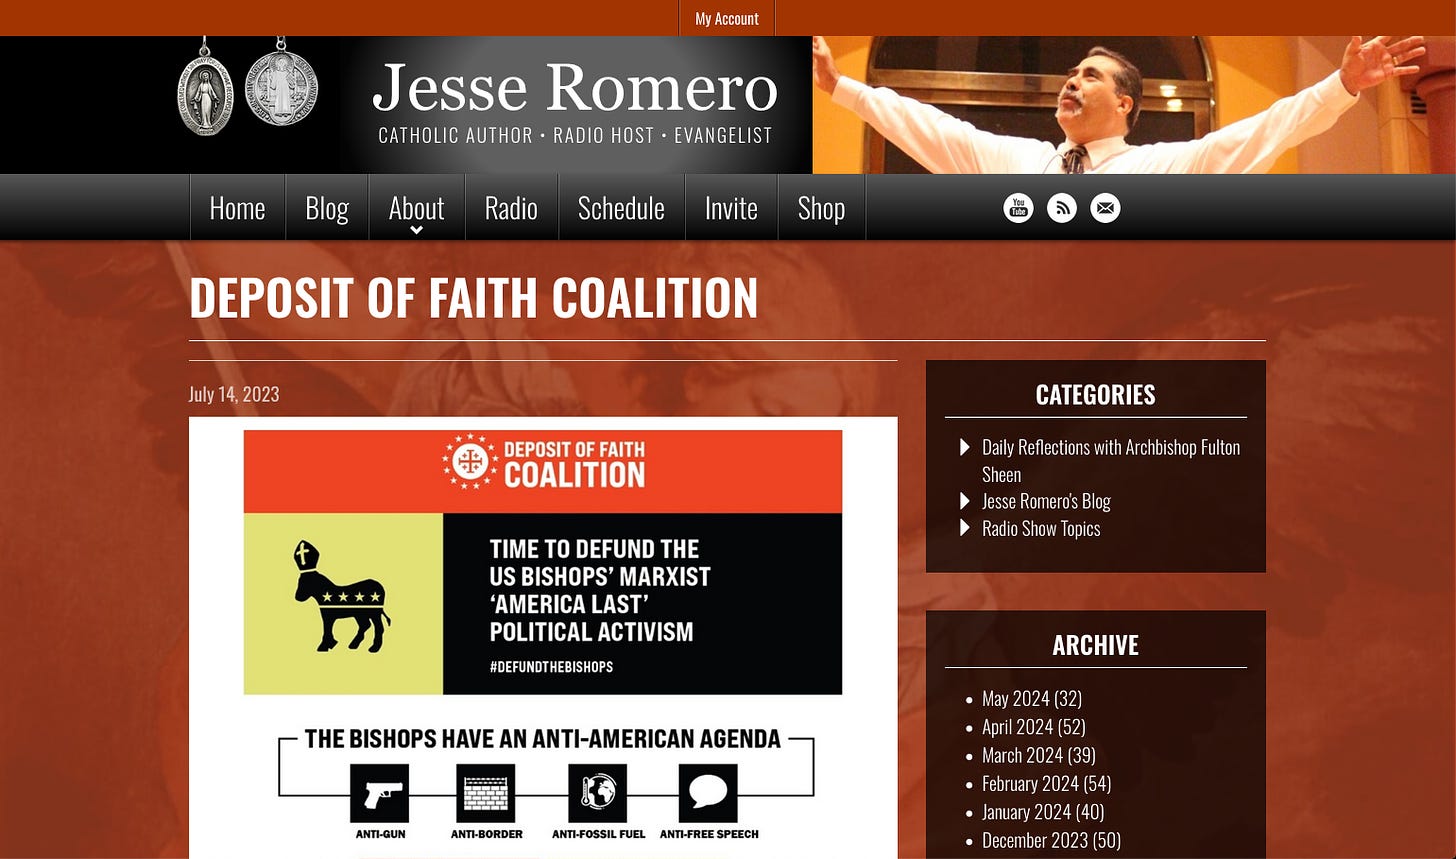 Homepage of Deposit of Faith Coalition accusing Bishops of an anti-American agenda.